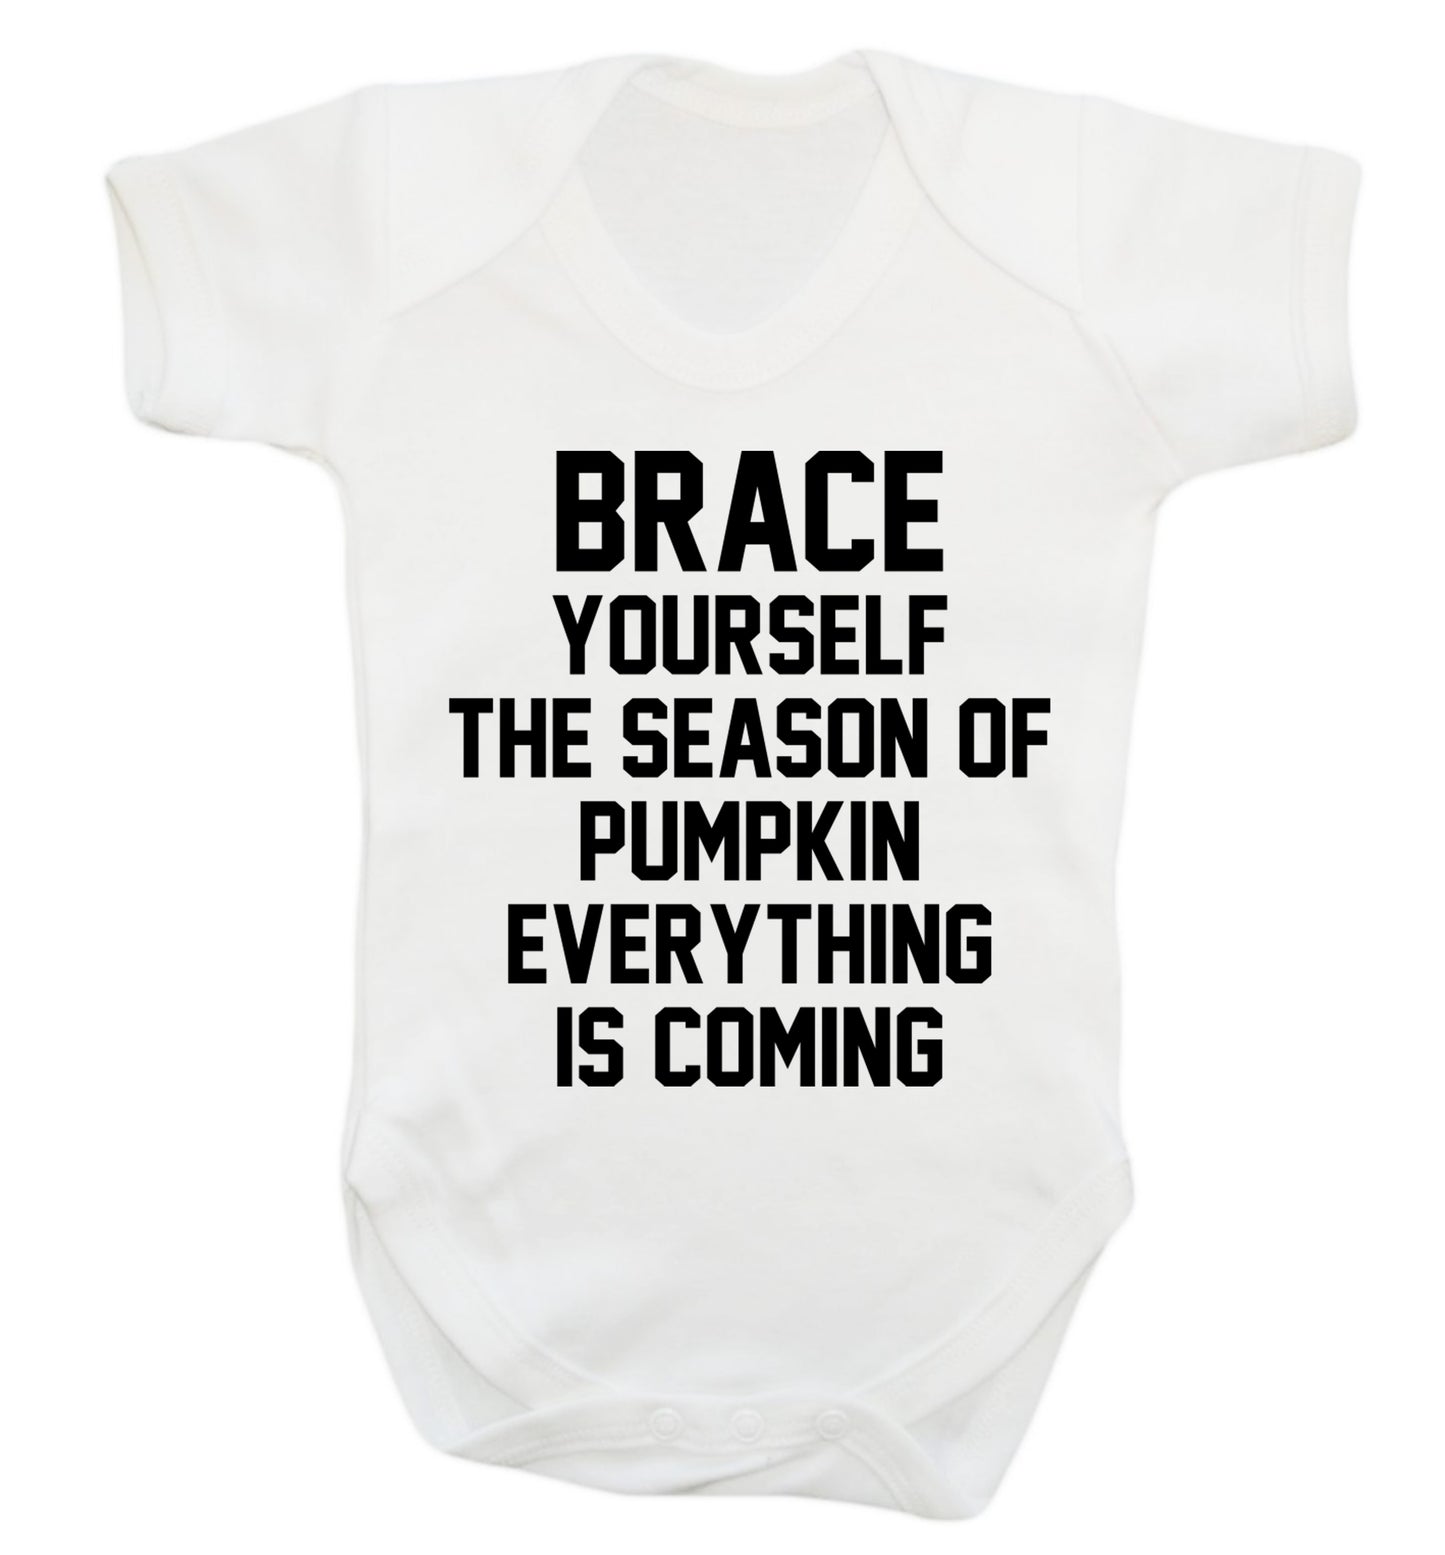 Brace yourself the season of pumpkin everything is coming Baby Vest white 18-24 months